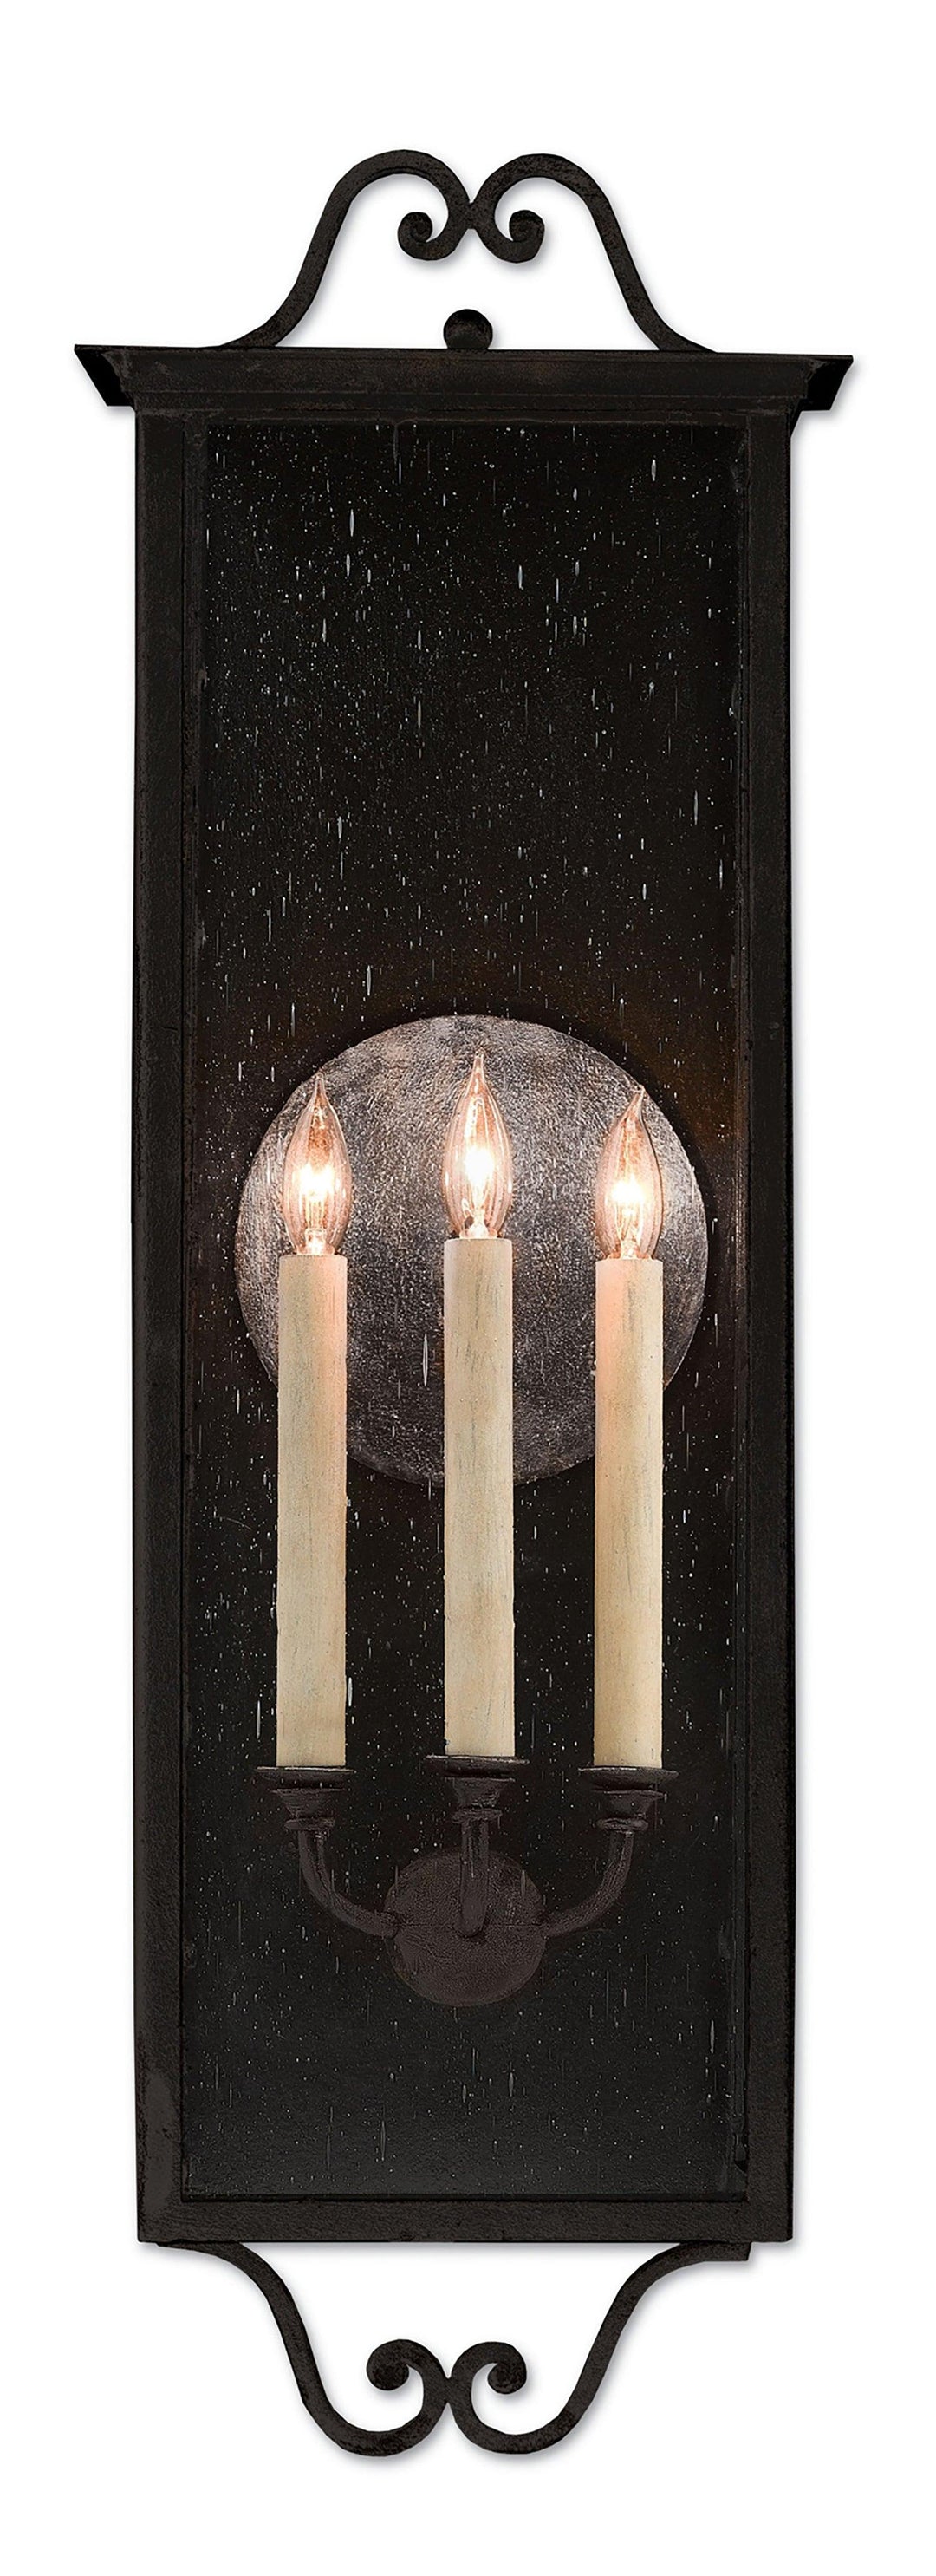 Giatti Large Outdoor Wall Sconce - Casey & Company